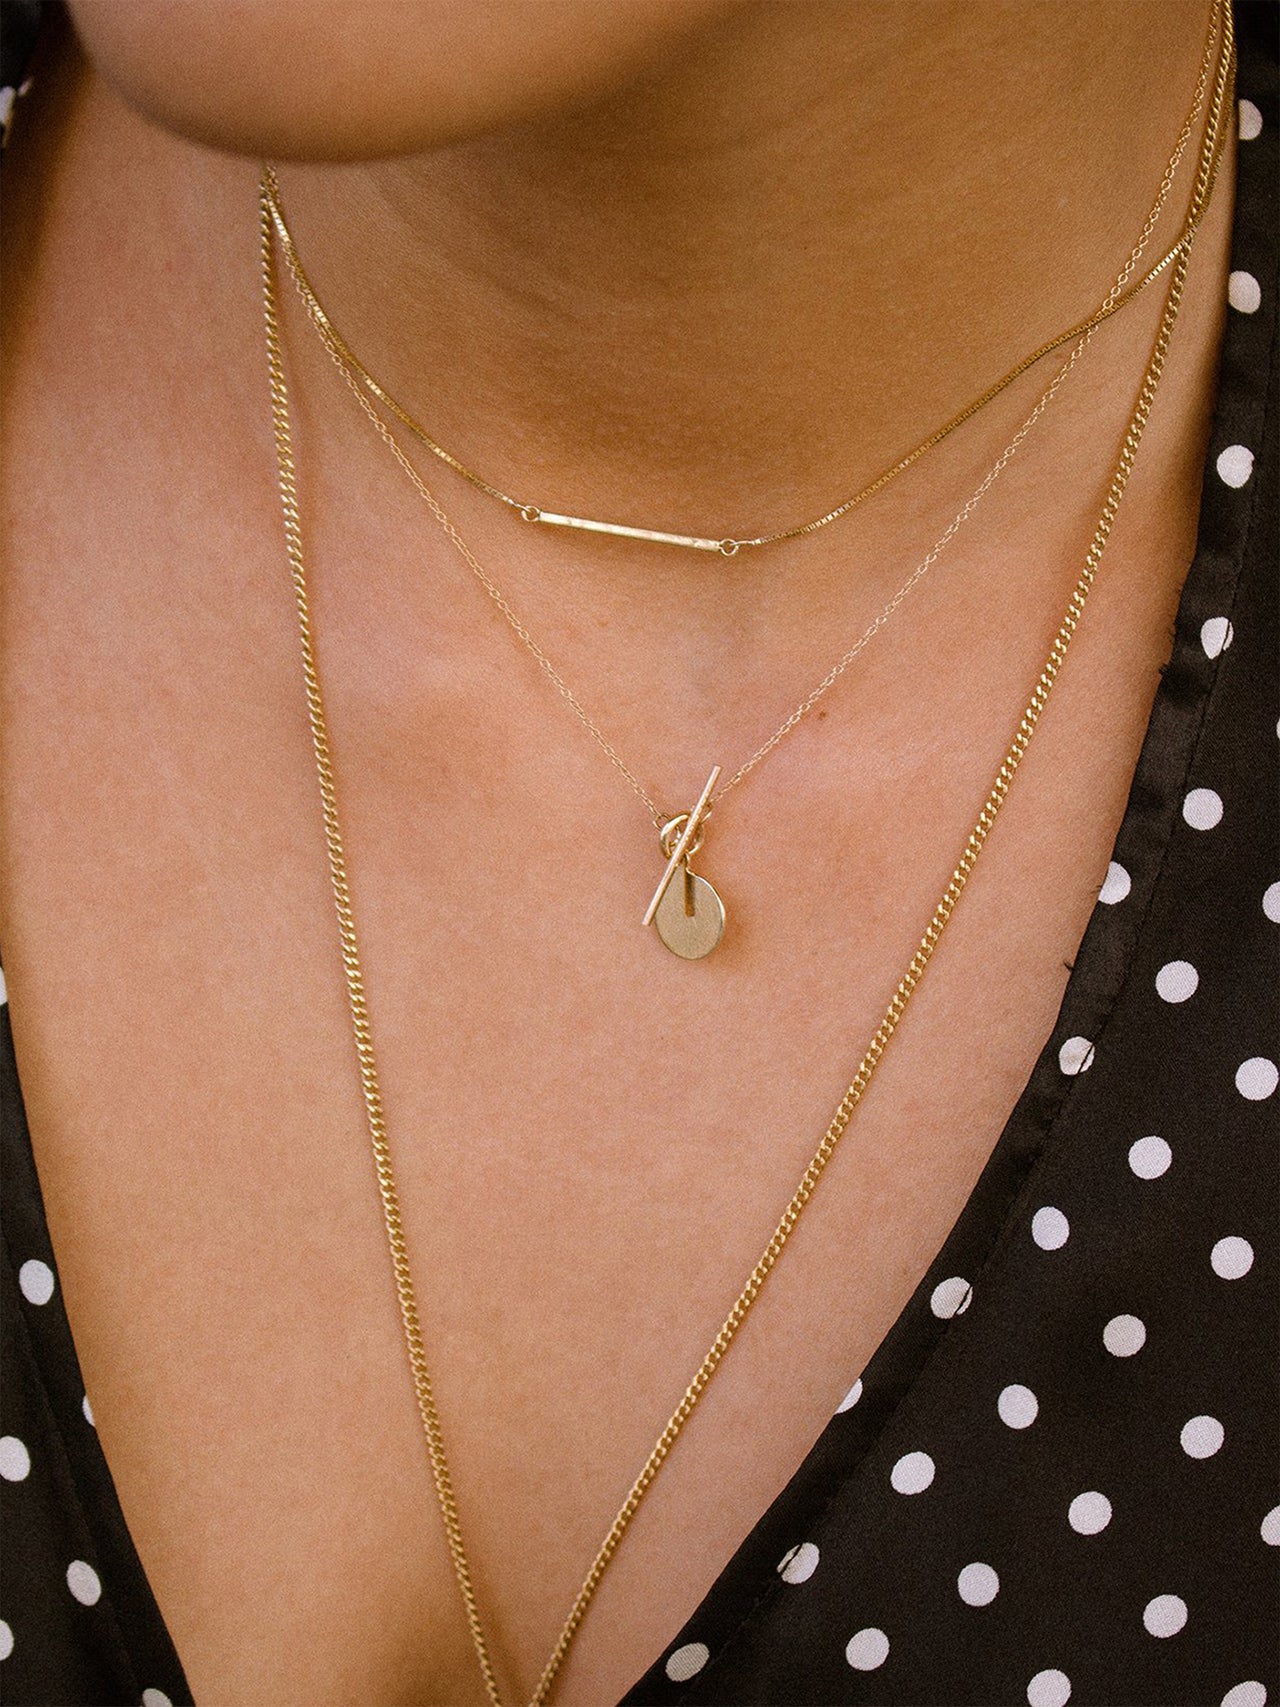 14Kt Yellow Gold Disk and Toggle Necklace shot on model